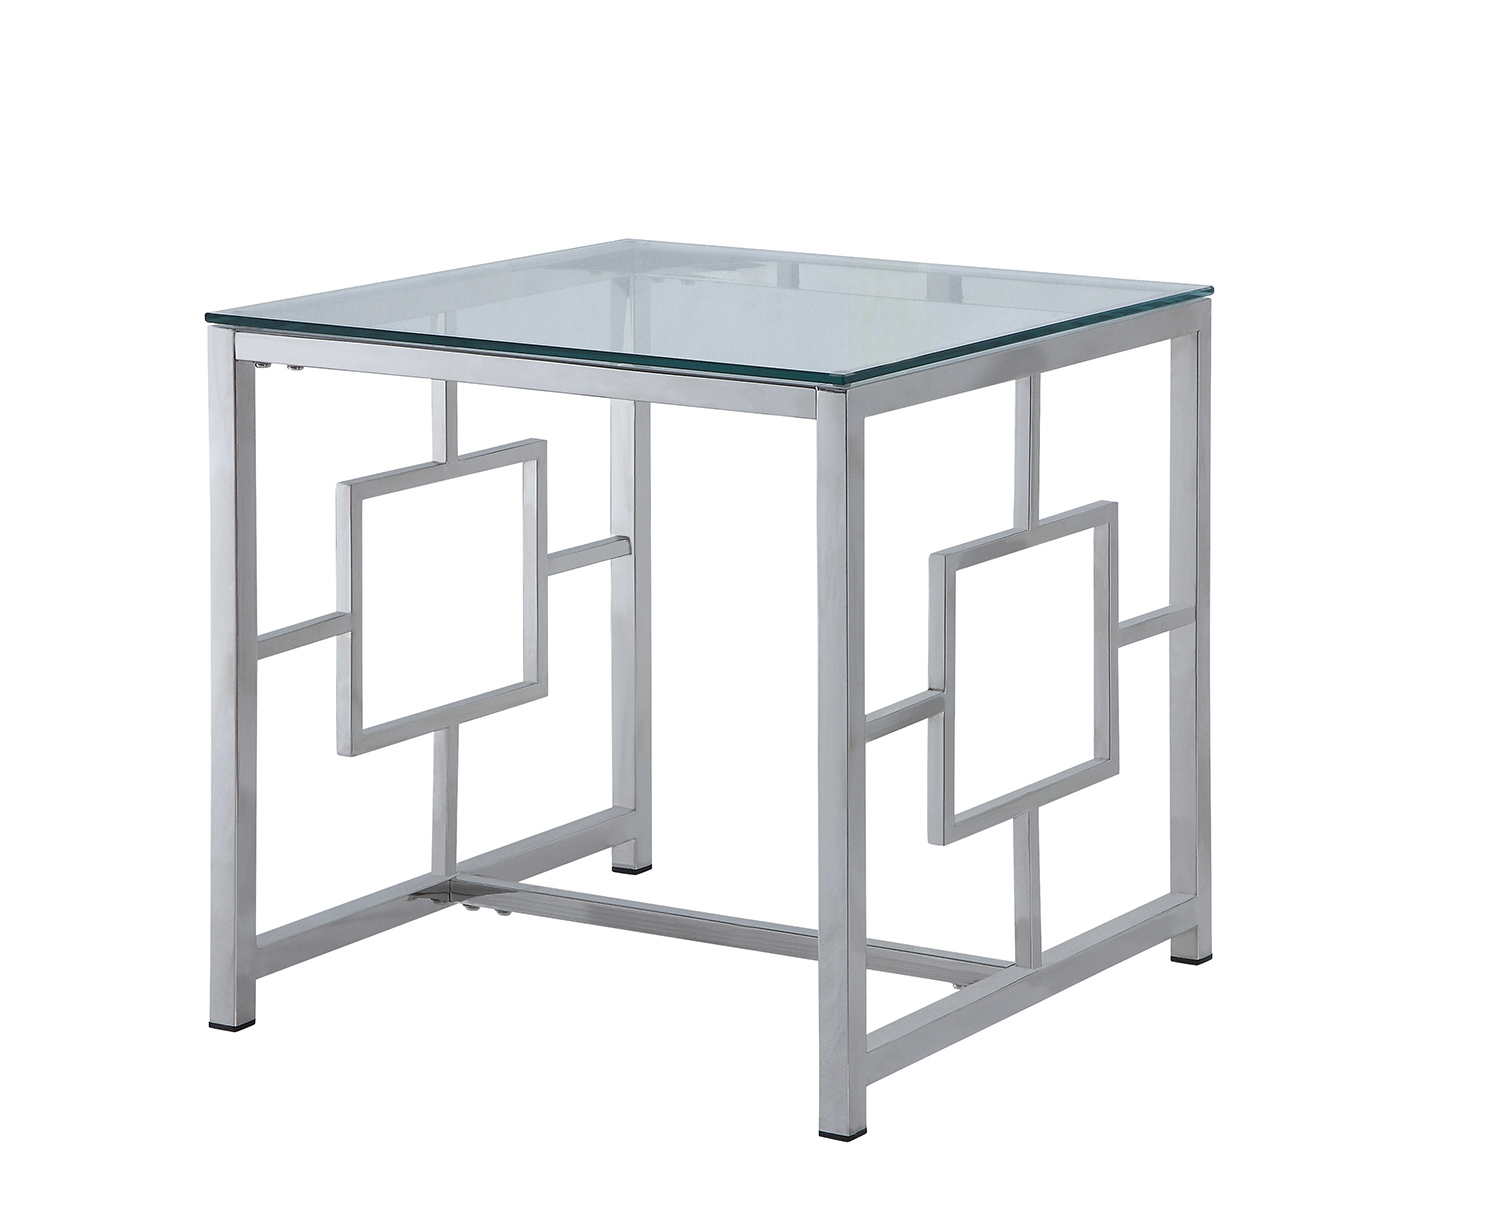 Homelegance Yesenia End Table with Glass Top - Chrome